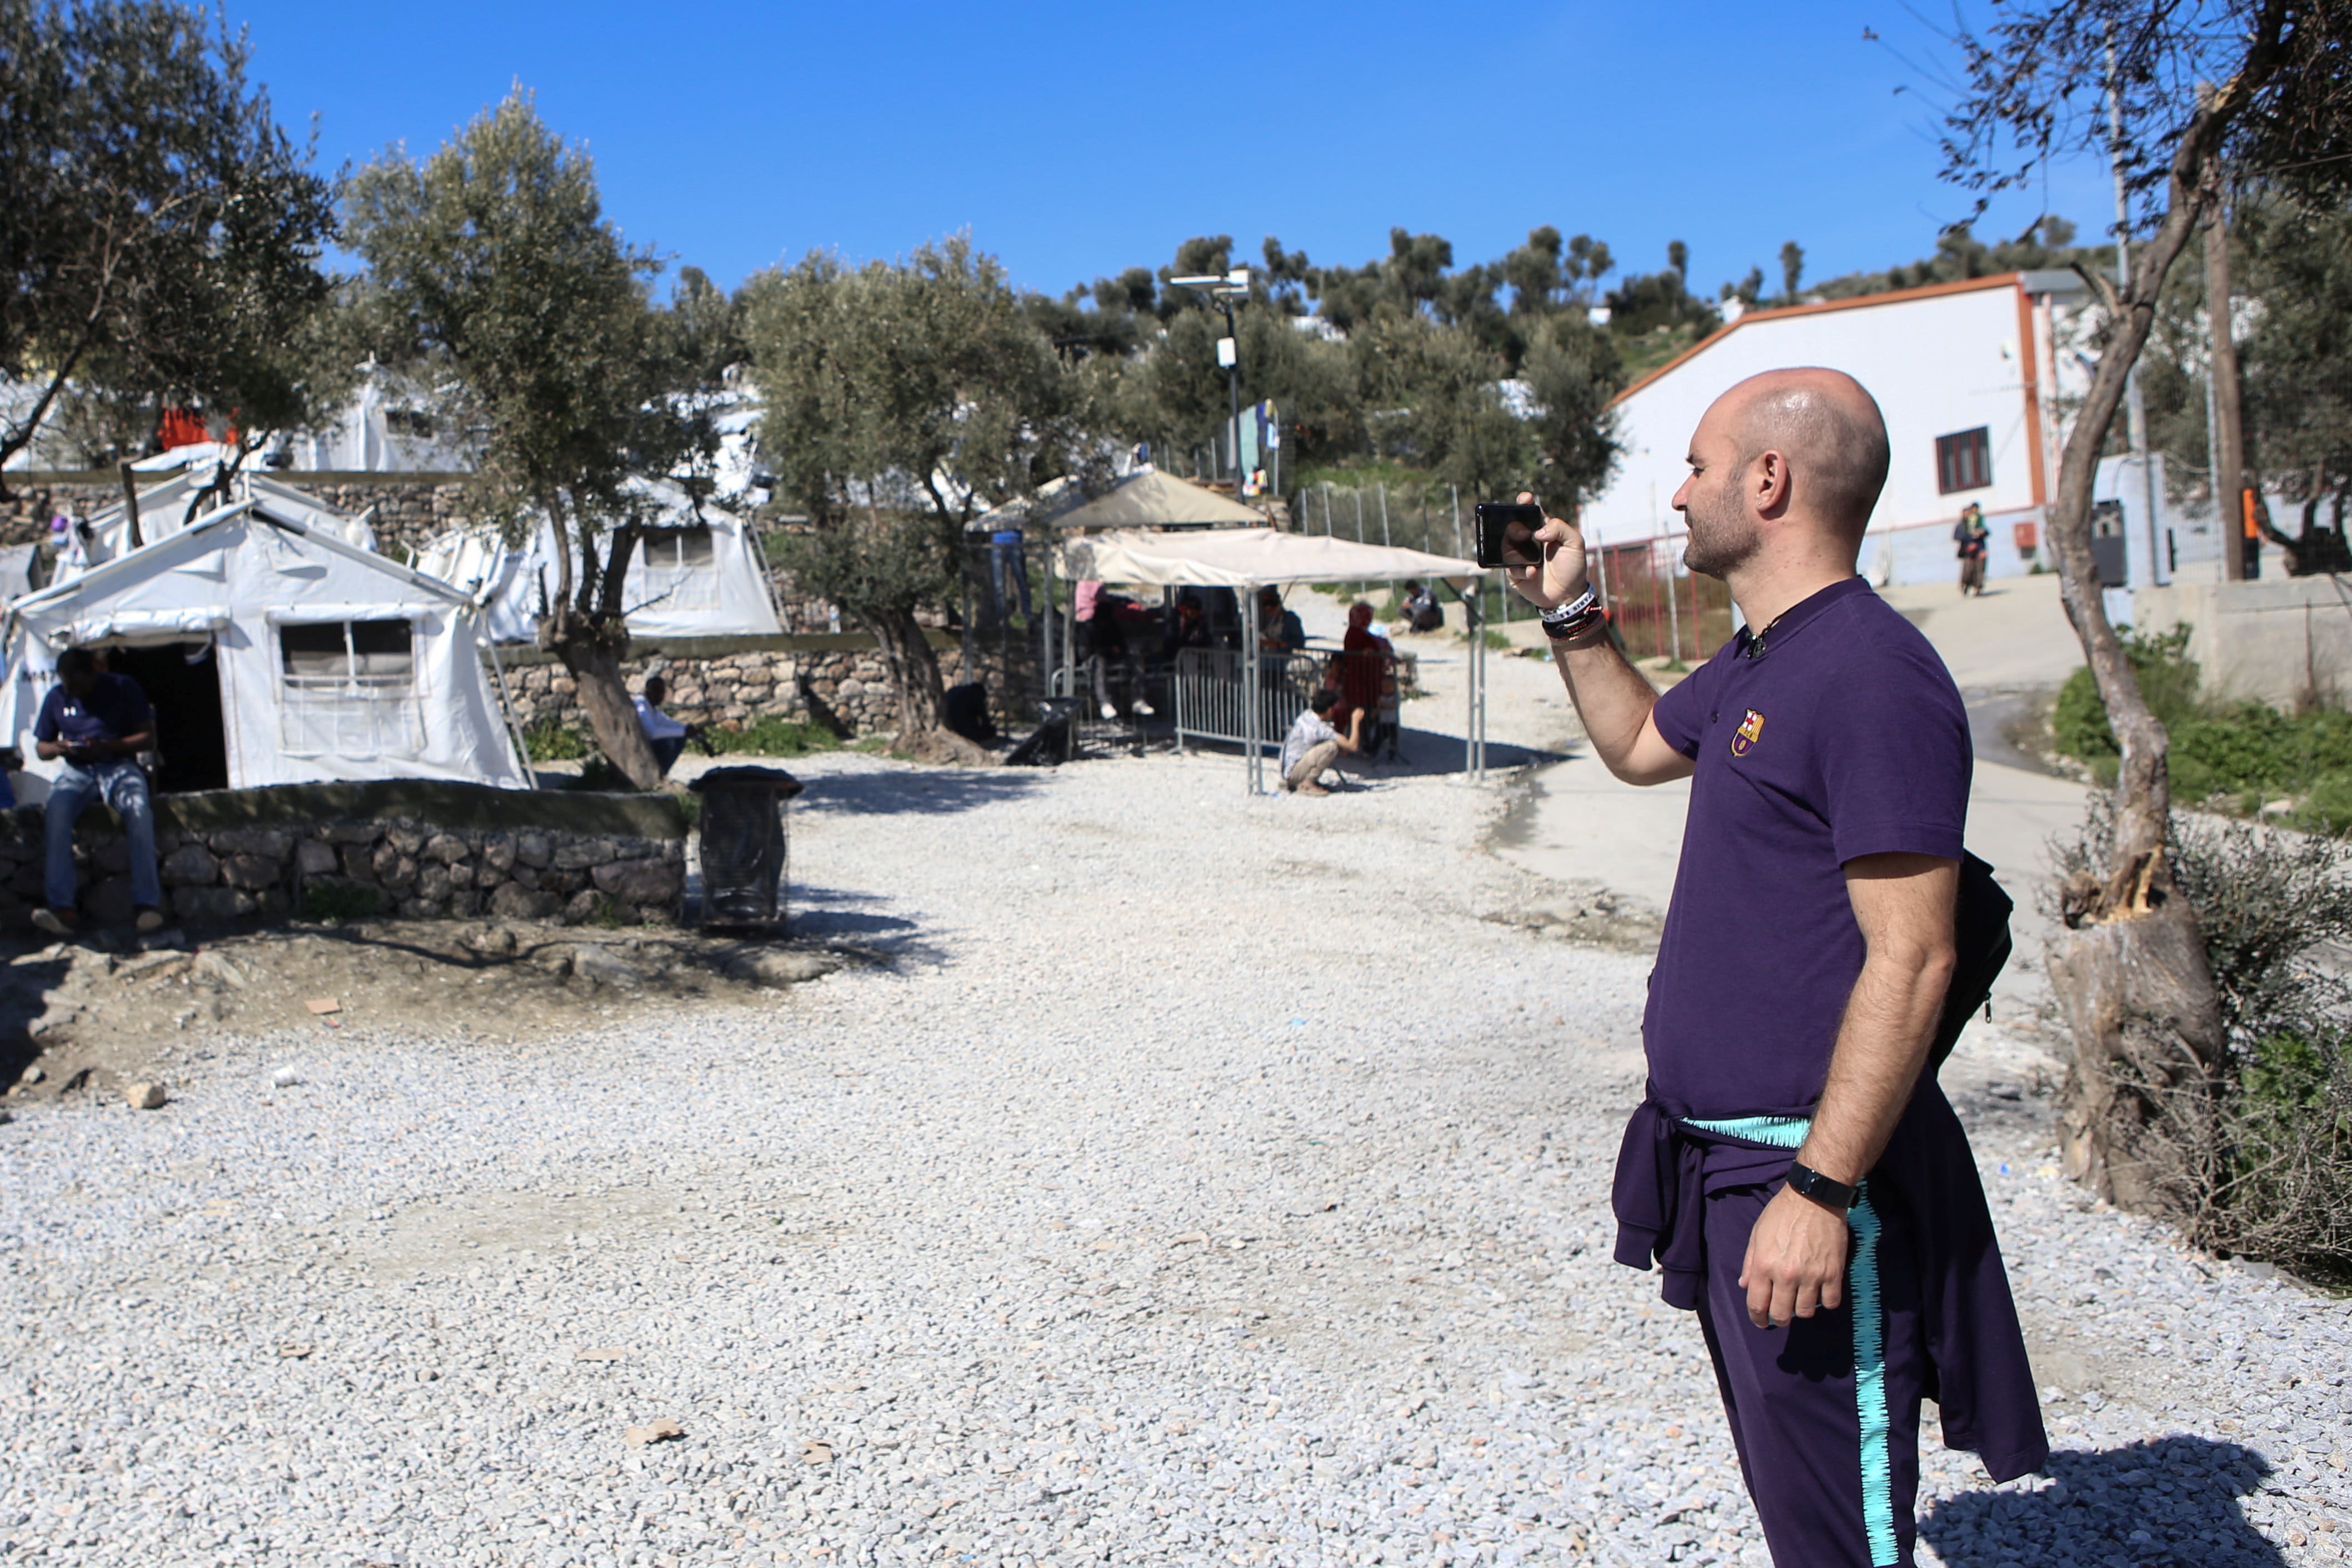 Former Barcelona FC player Jordi Ferron takes pictures in the Moria refugee camp in Lesbos, Greece. (Elias Marcou-Reuters)